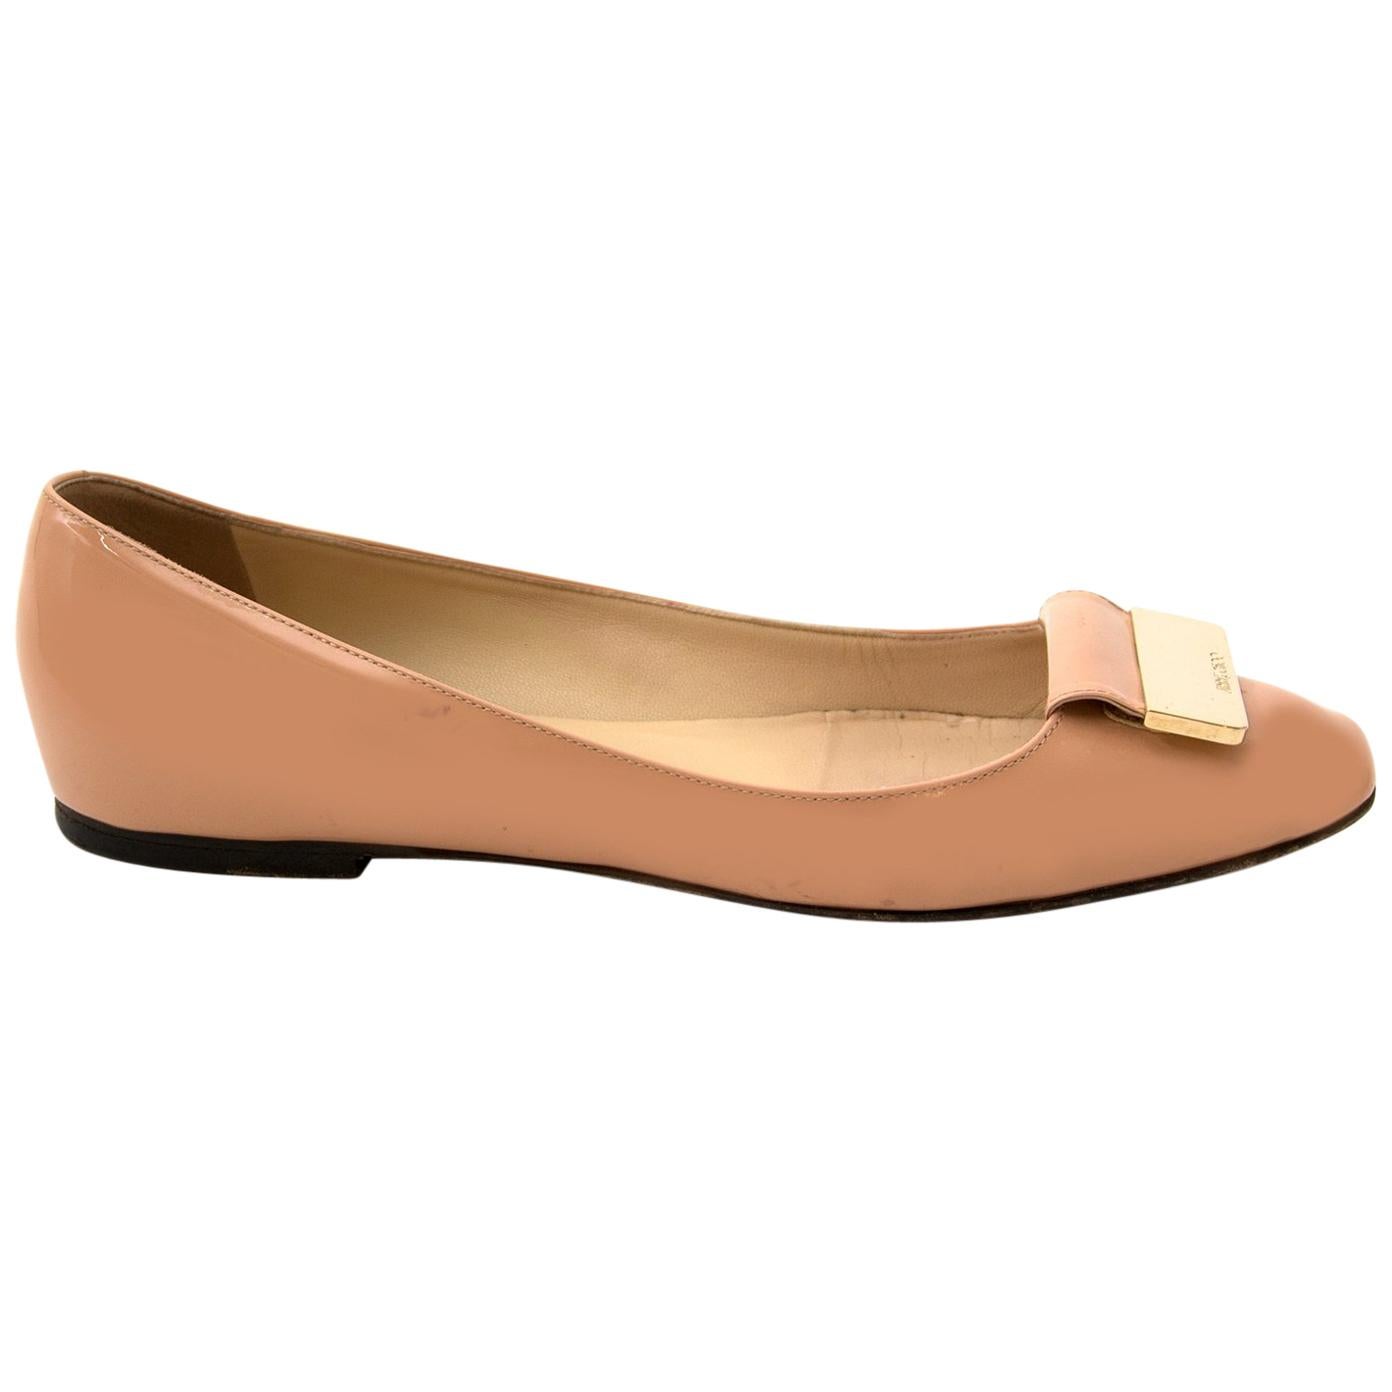 Jimmy Choo Nude Patent Ballet Flats  - size 39, 5 For Sale